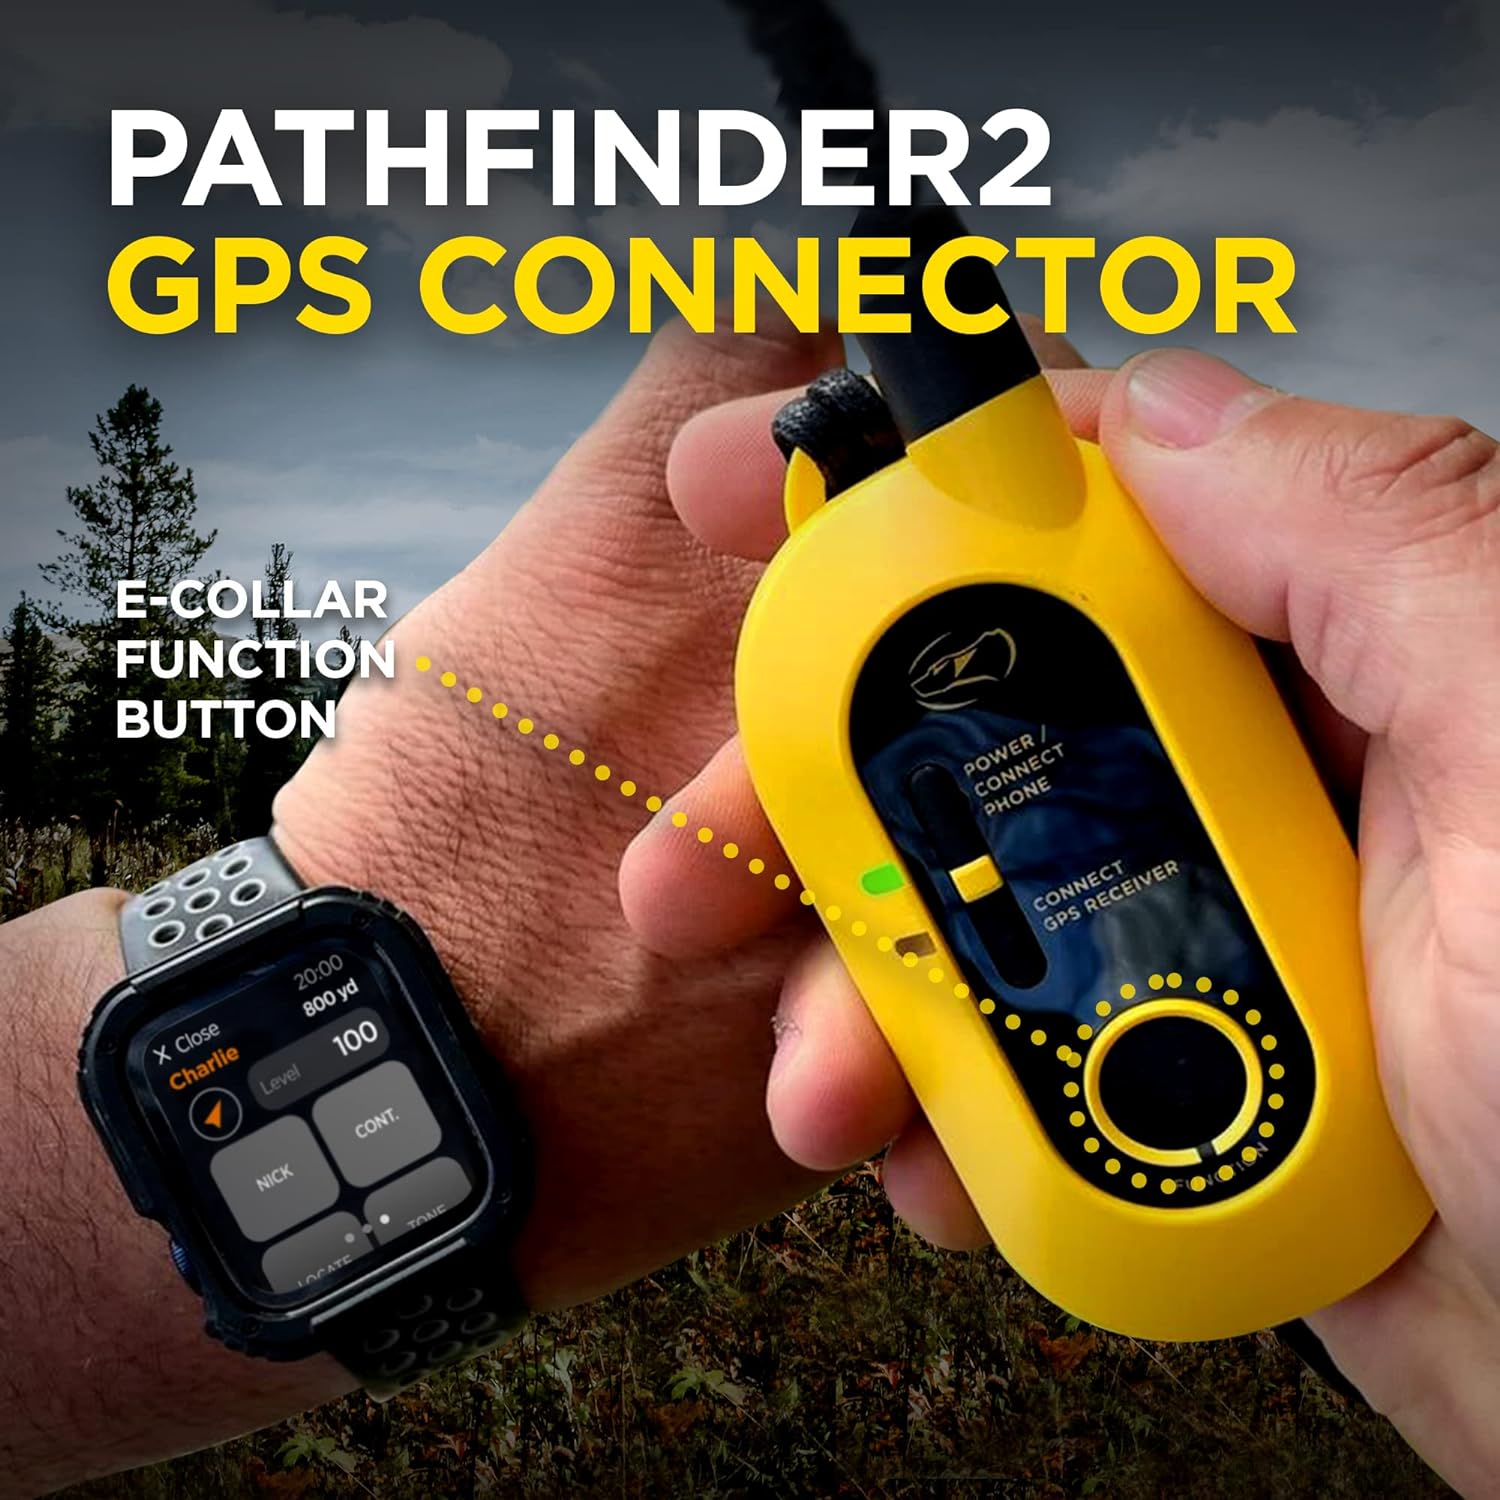 Dogtra Pathfinder 2 Mini GPS Dog Tracker e Collar 4 Mile Long Range LED Light No Monthly Fees Free App Waterproof Smartwatch Control Based Real Time Tracking Multiple Dogs Smartphone Required